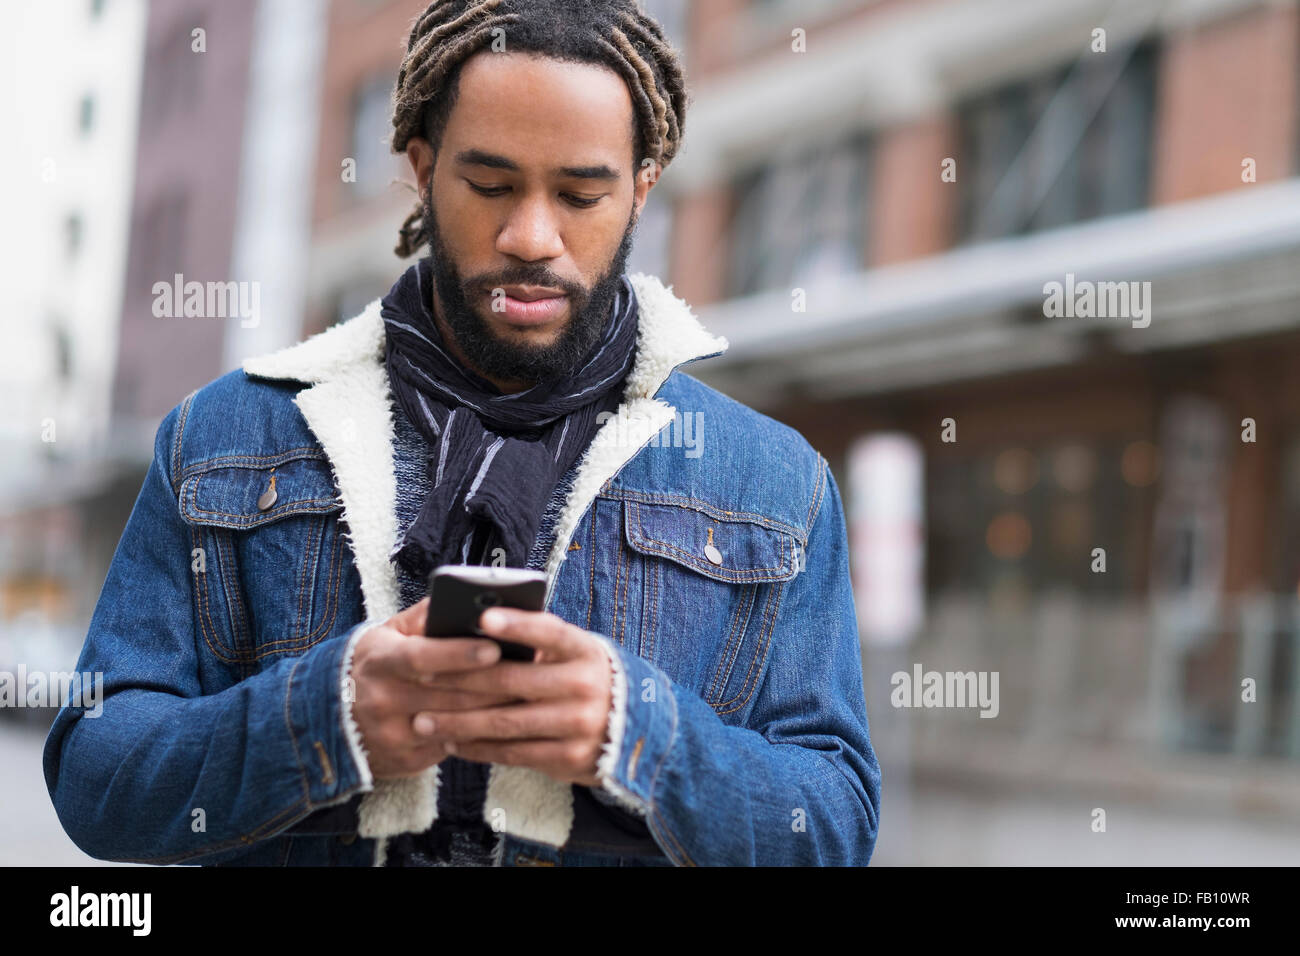 Serious man with dreadlocks using smart phone in street Stock Photo